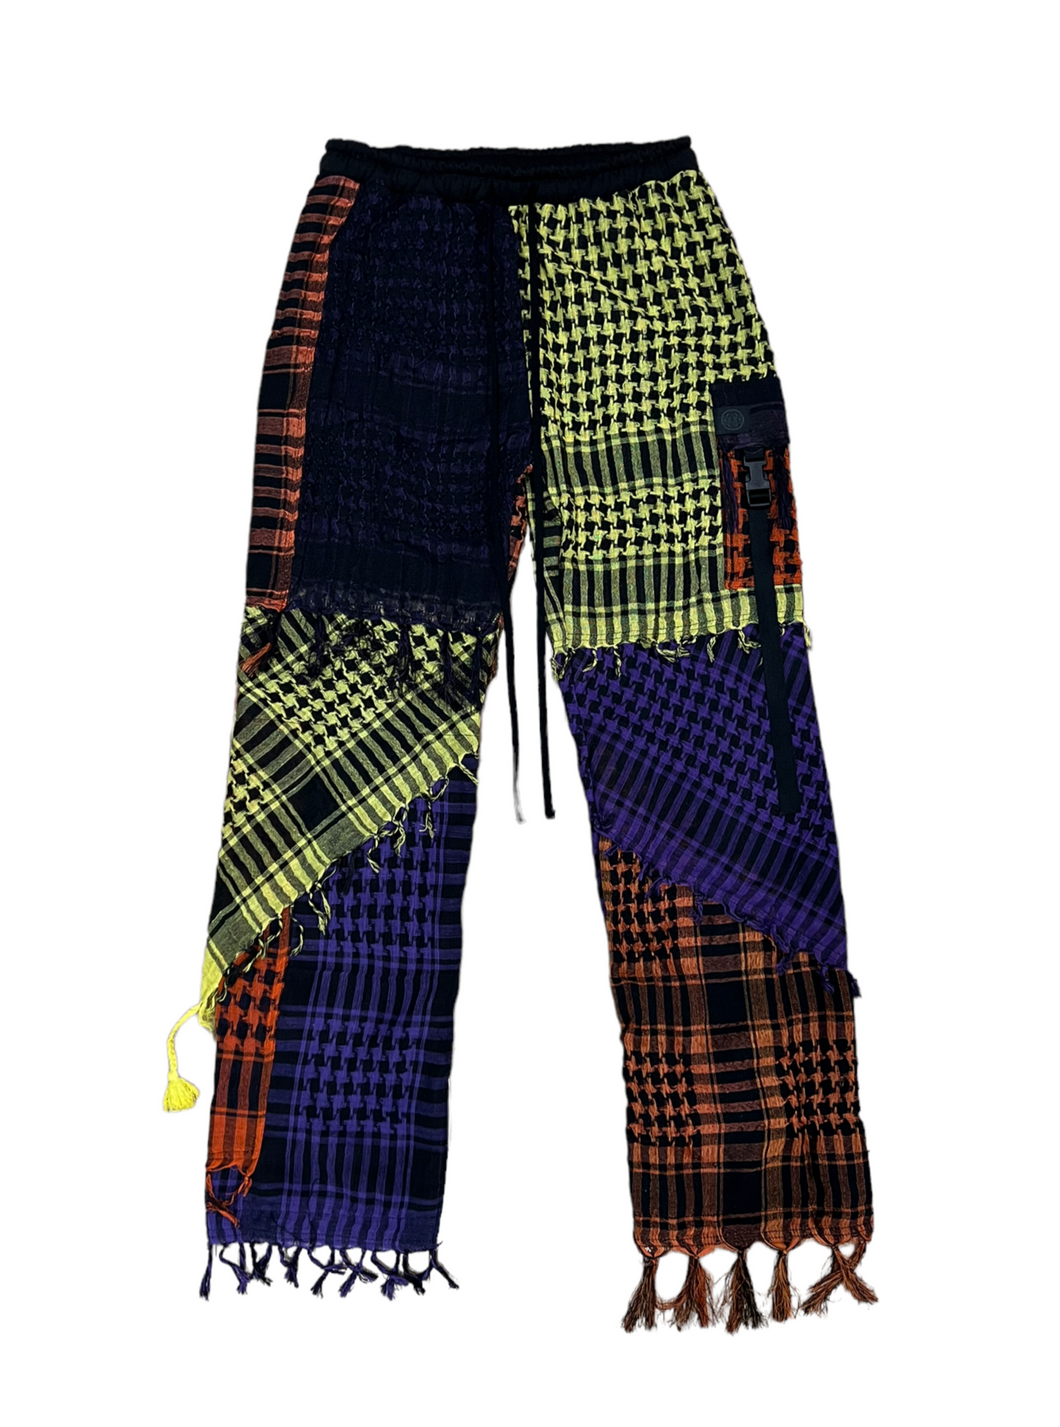 1 of 1 PURPLE YELLOW N ORNAGE SHEMAGH PATCHWORK PANTS (M/L 32-36” waist)